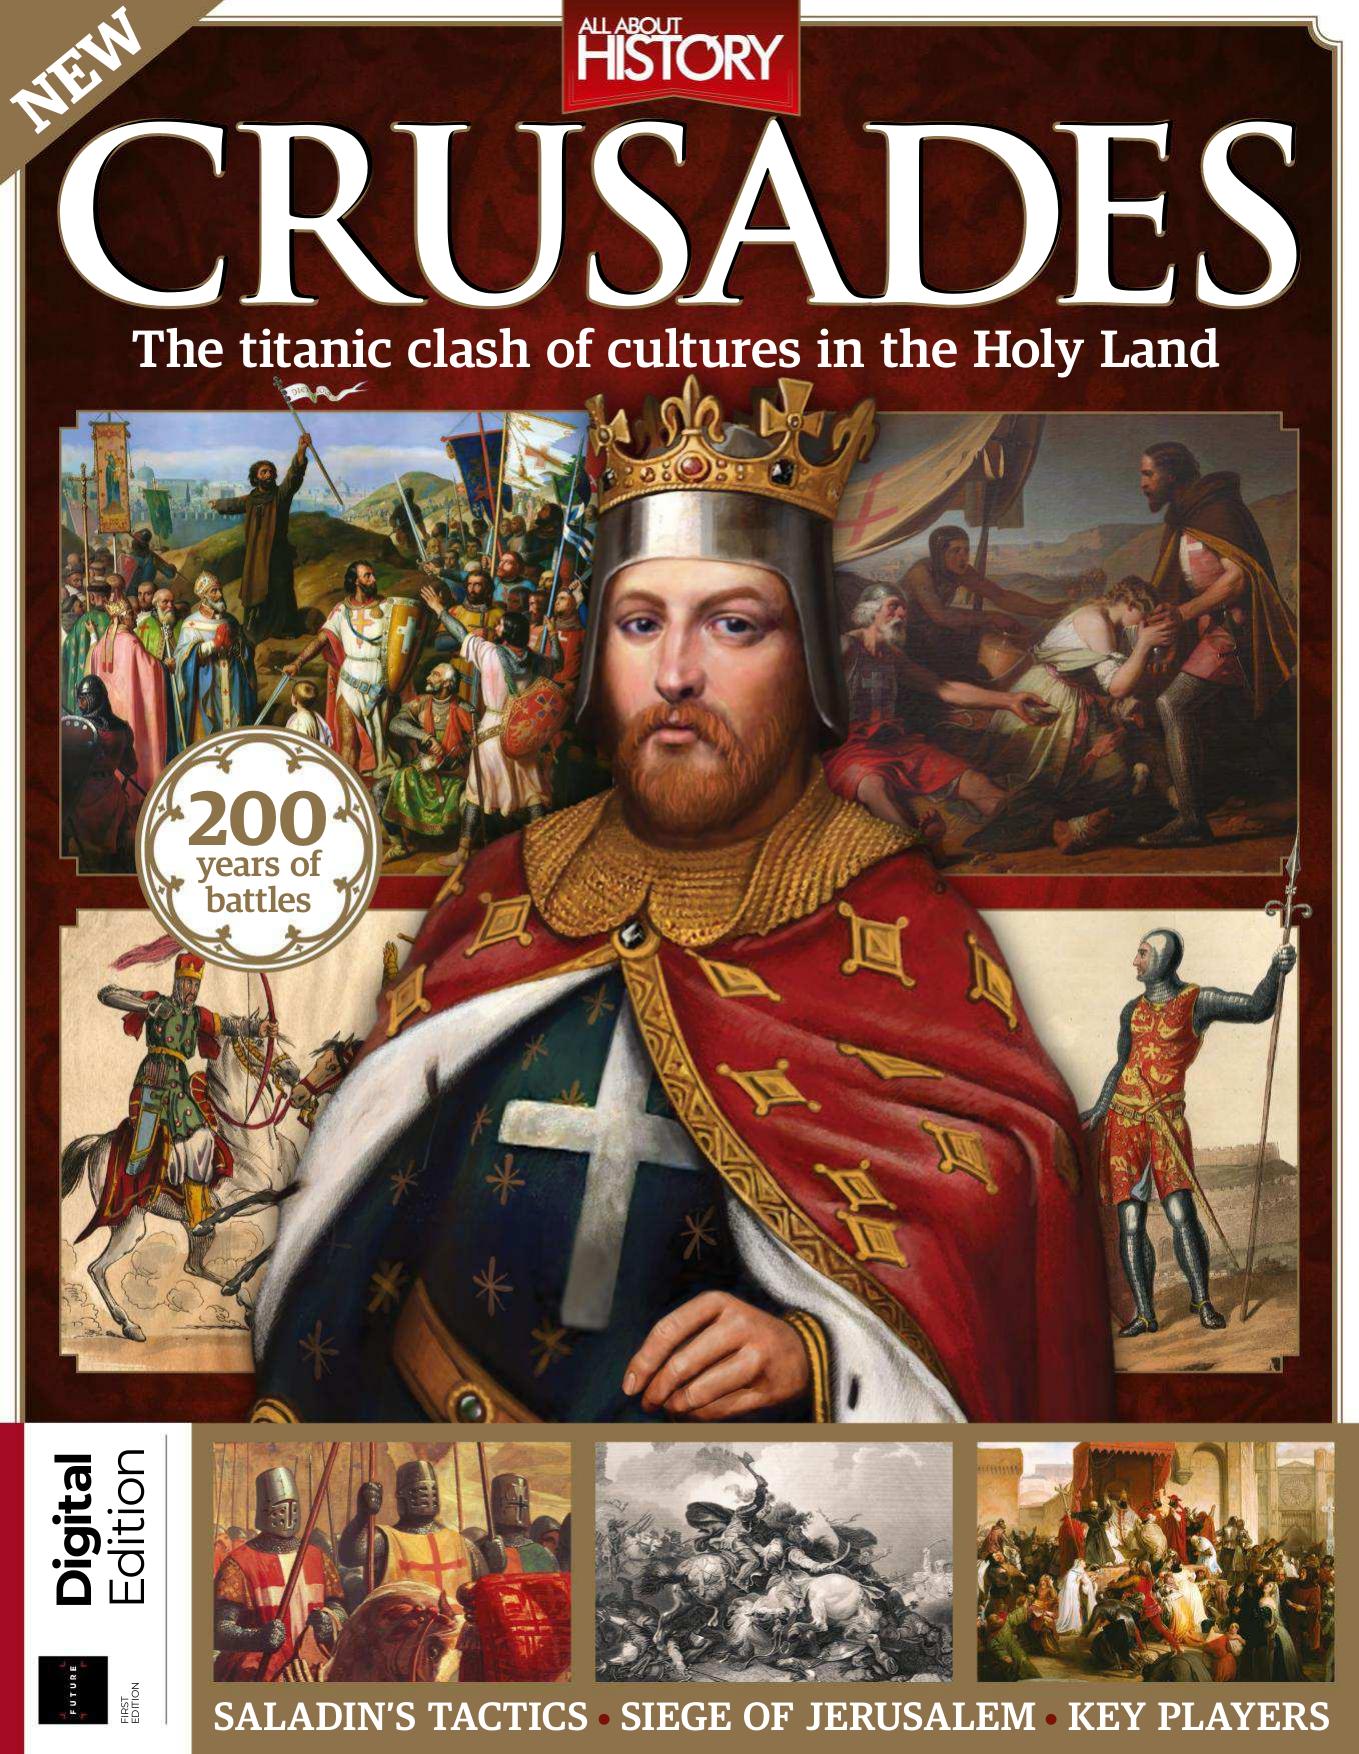 Crusades, the Titanic Clash of Cultures in the Holy Land